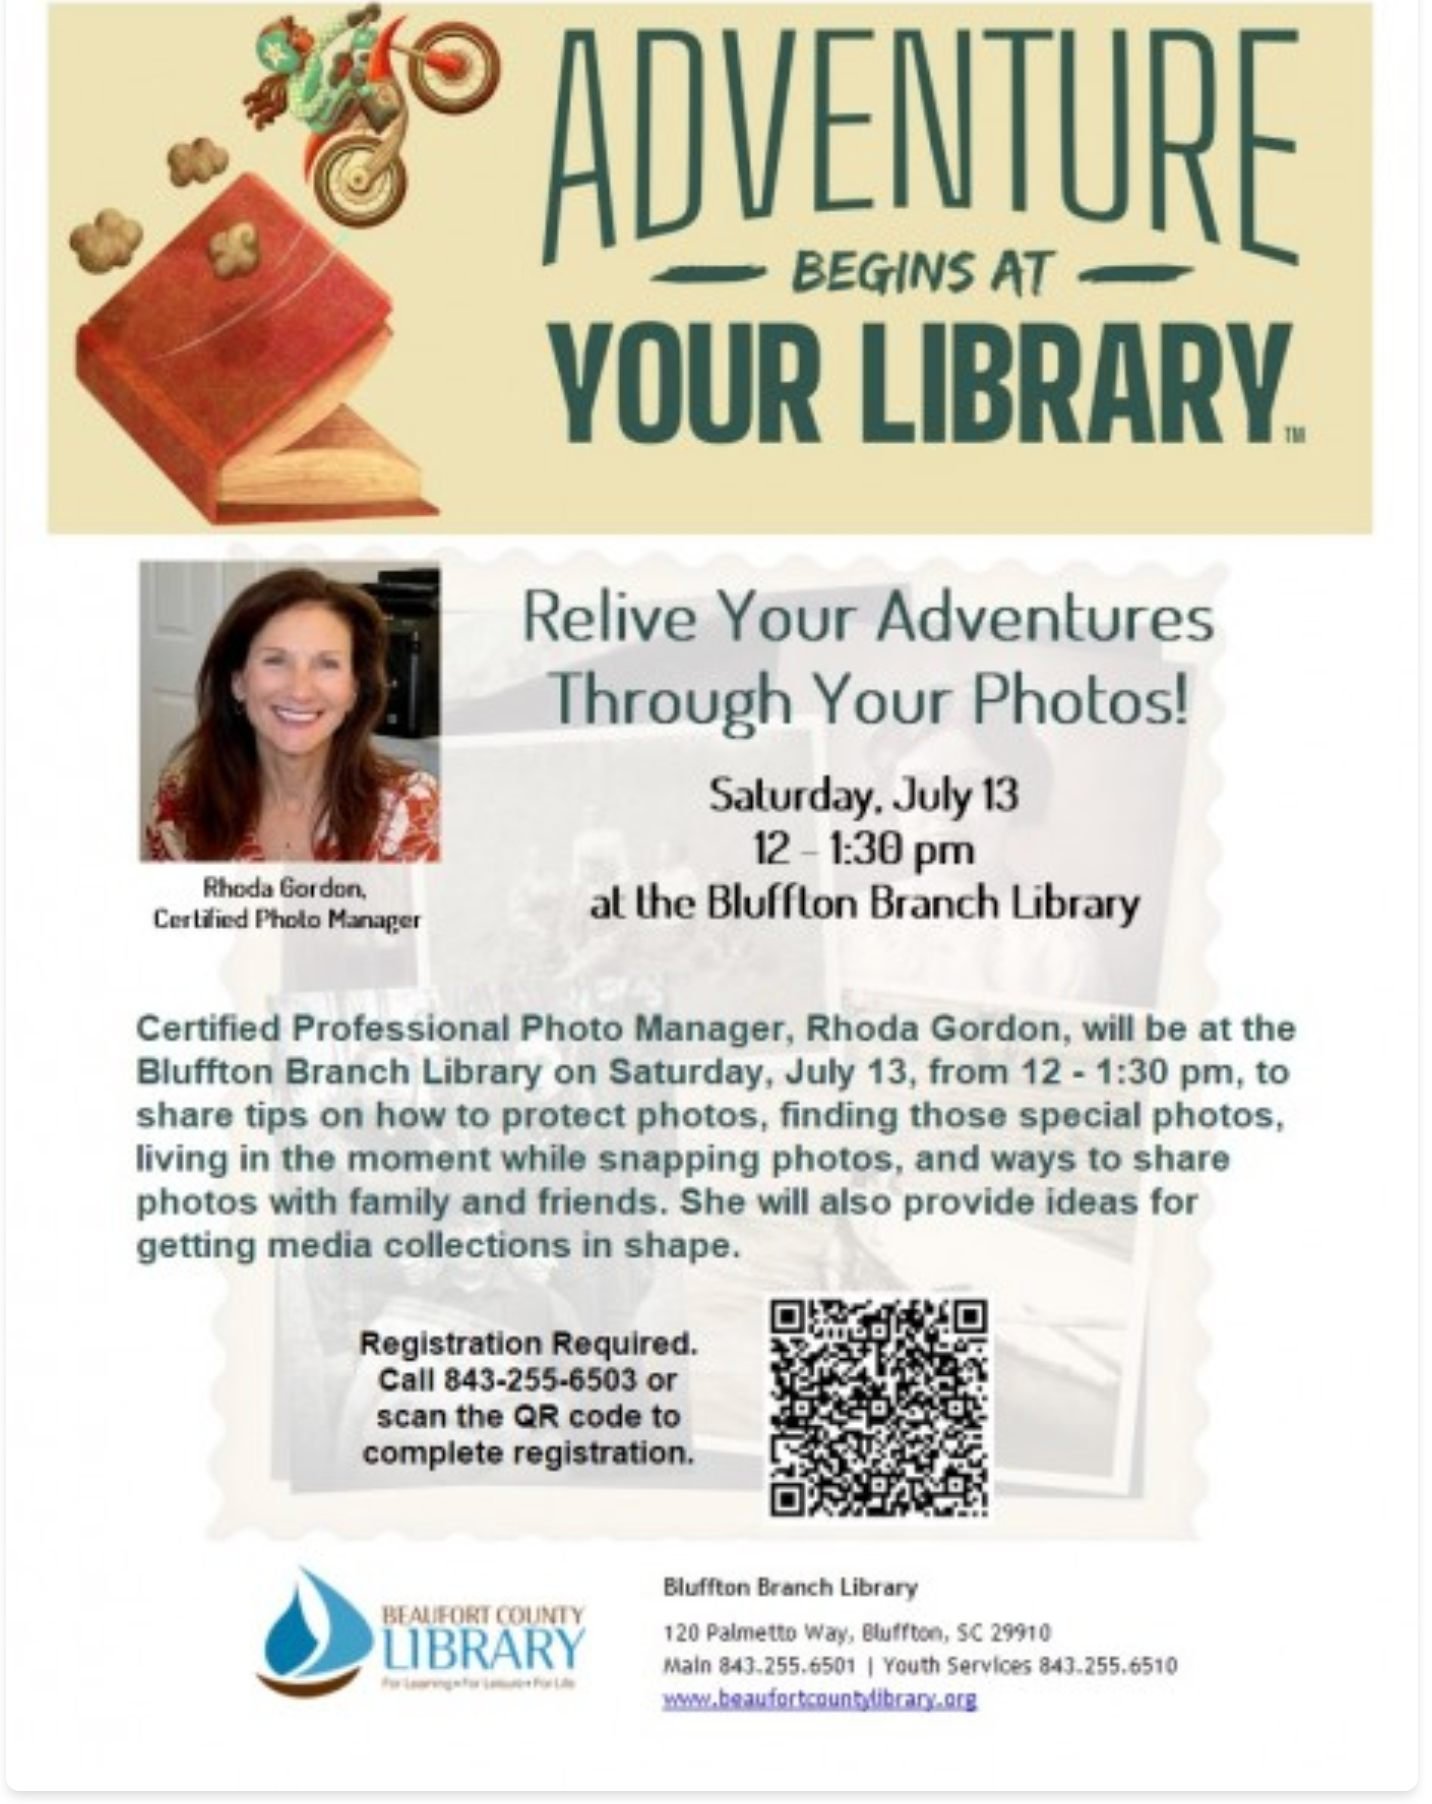 Local Peeps! Mark your calendars. I will be sharing tips and tricks to help you find and manage your photos easier! This will be an informative and interactive talk, but most important, it will be fun! See you on July 13th! #libraryfun #photoscount #